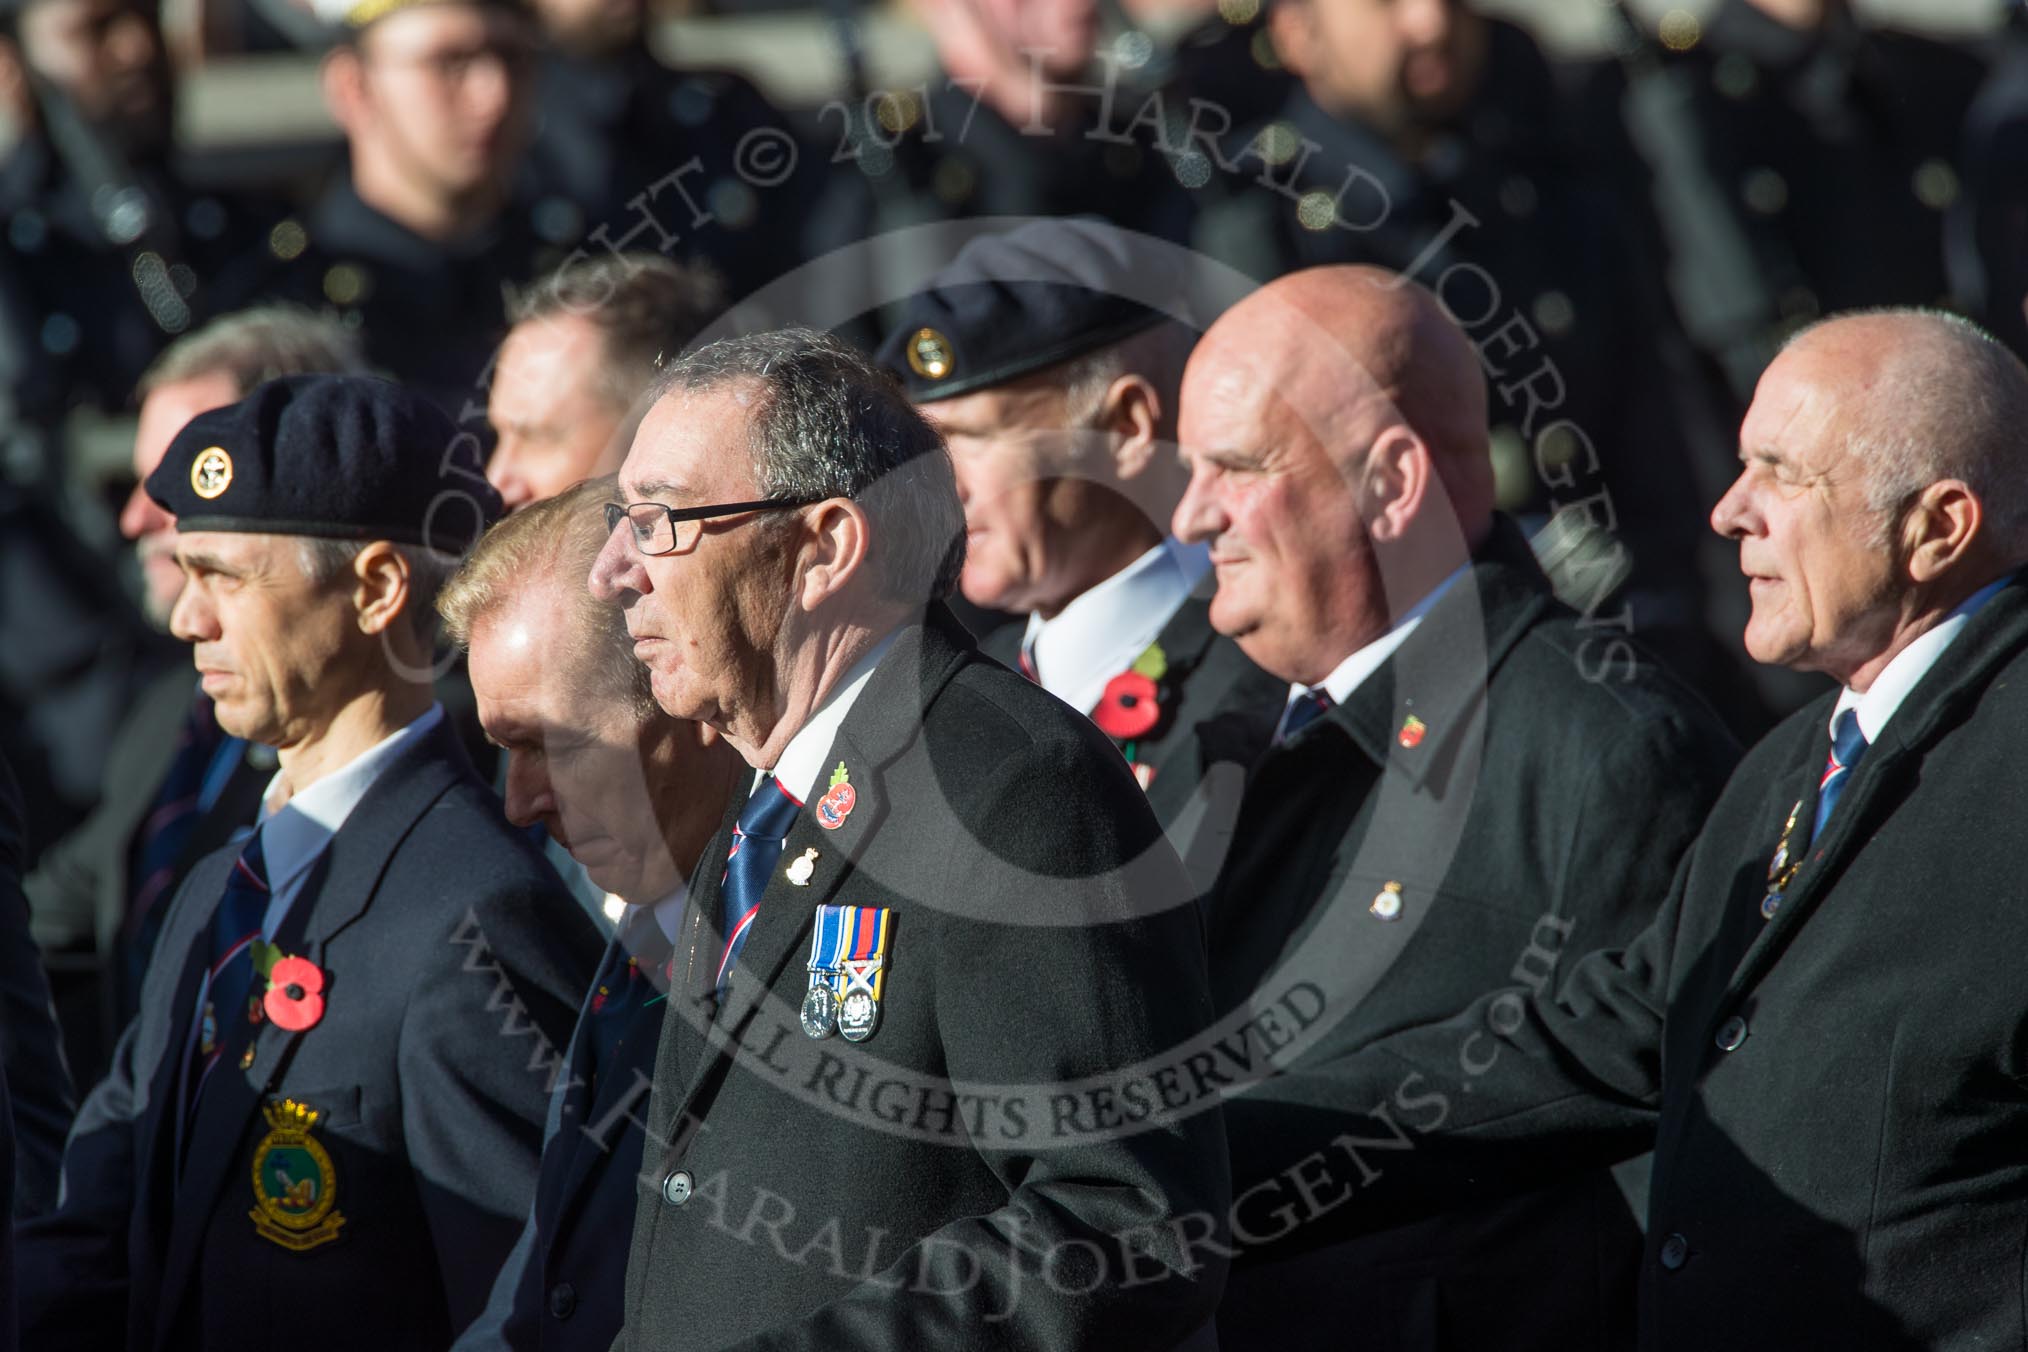 County Class Destroyer (Group E43, 30 members)  during the Royal British Legion March Past on Remembrance Sunday at the Cenotaph, Whitehall, Westminster, London, 11 November 2018, 11:47.